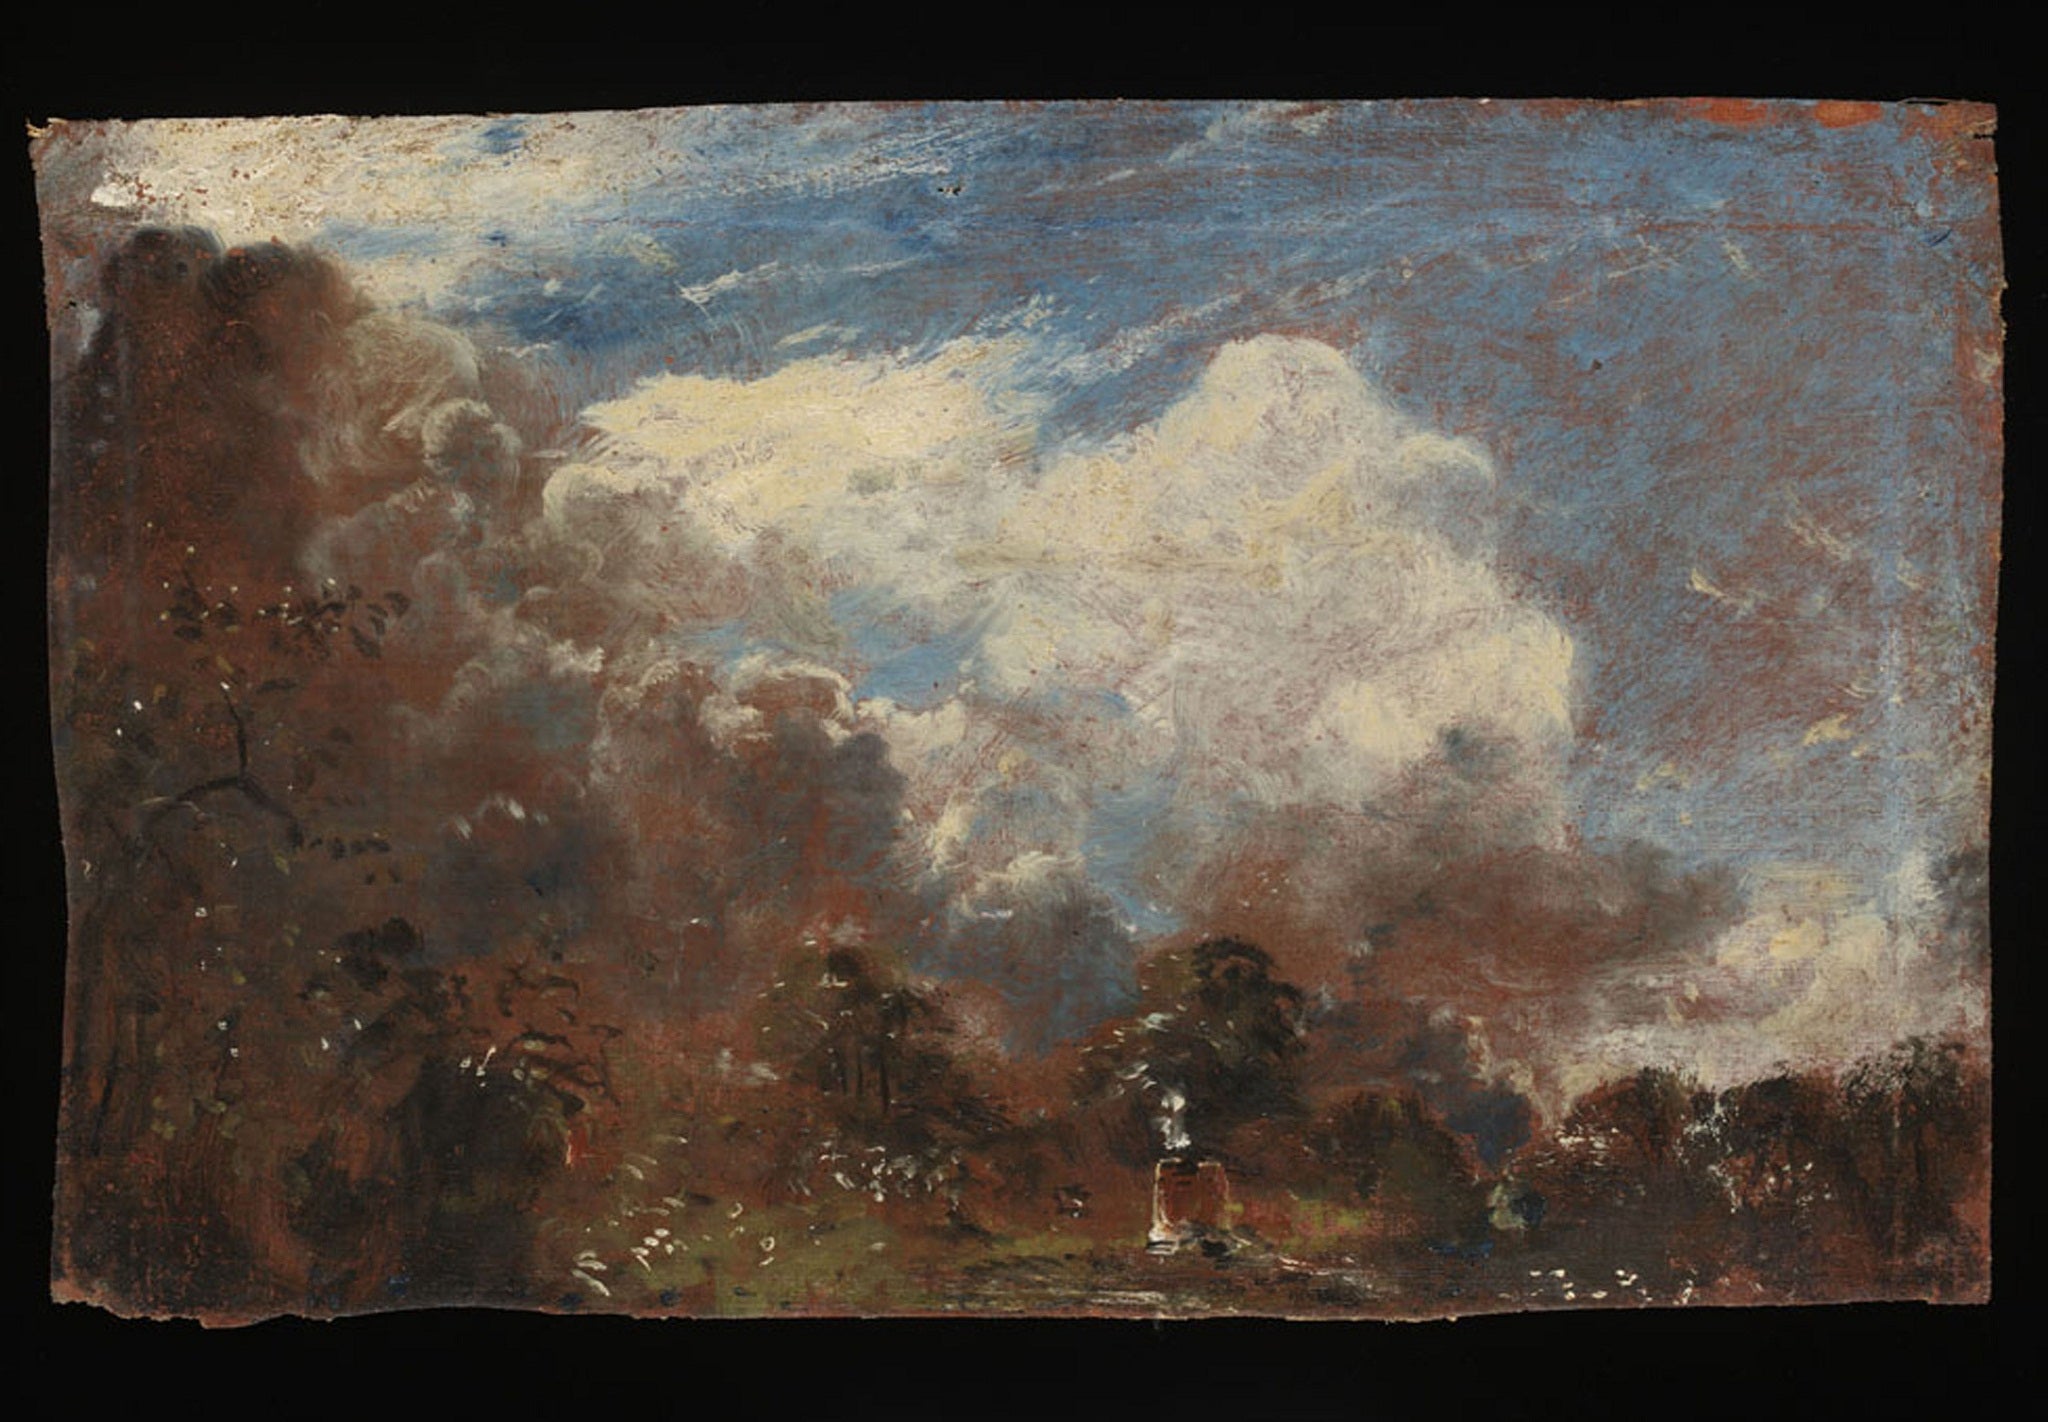 John Constable sketch initially deemed a copy sells for almost £100,000 -  BBC News